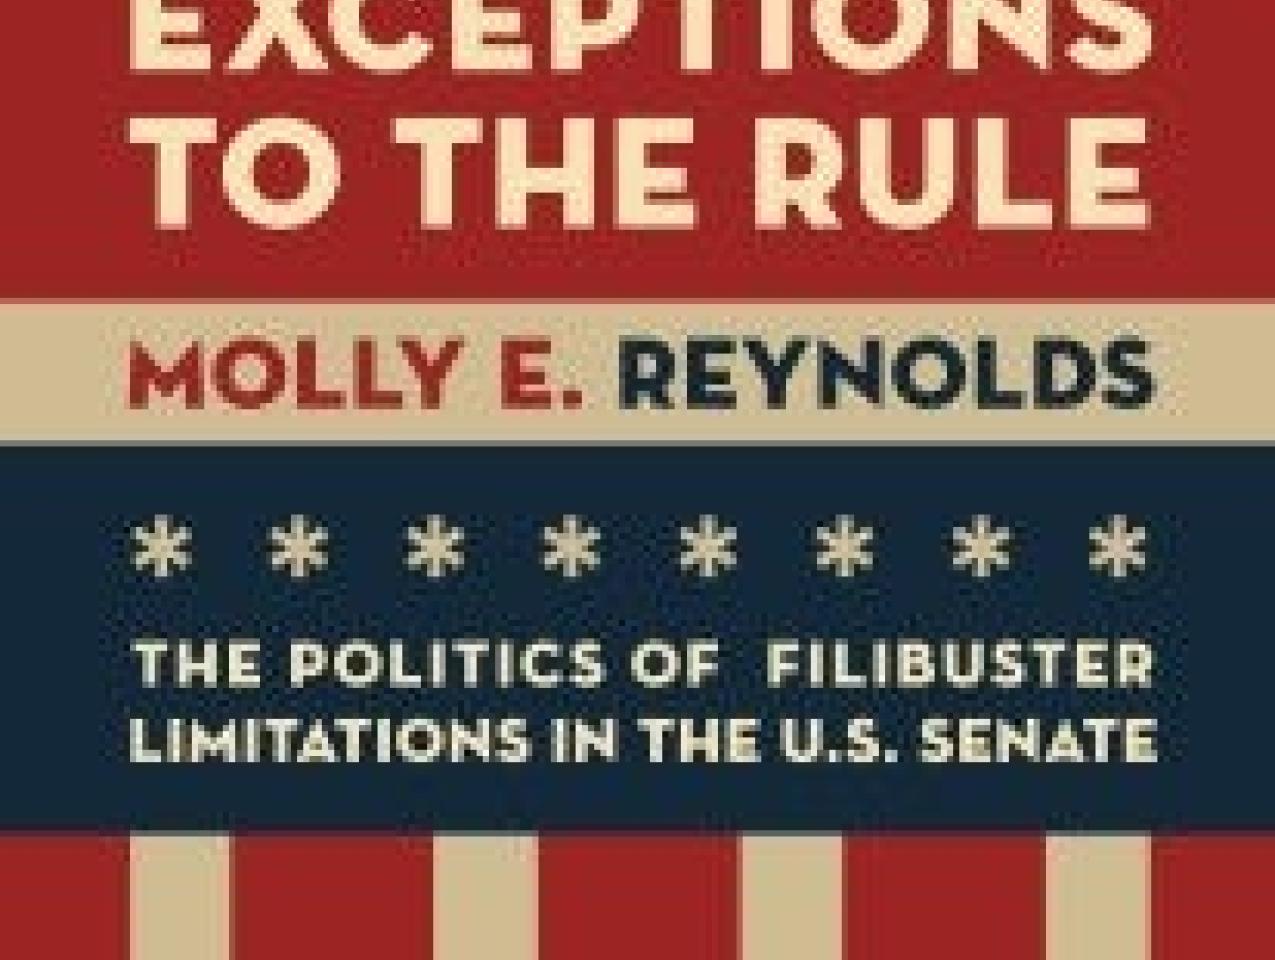 Image for Exceptions To The Rule: The Politics Of Filibuster Limitations In The U.S. Senate